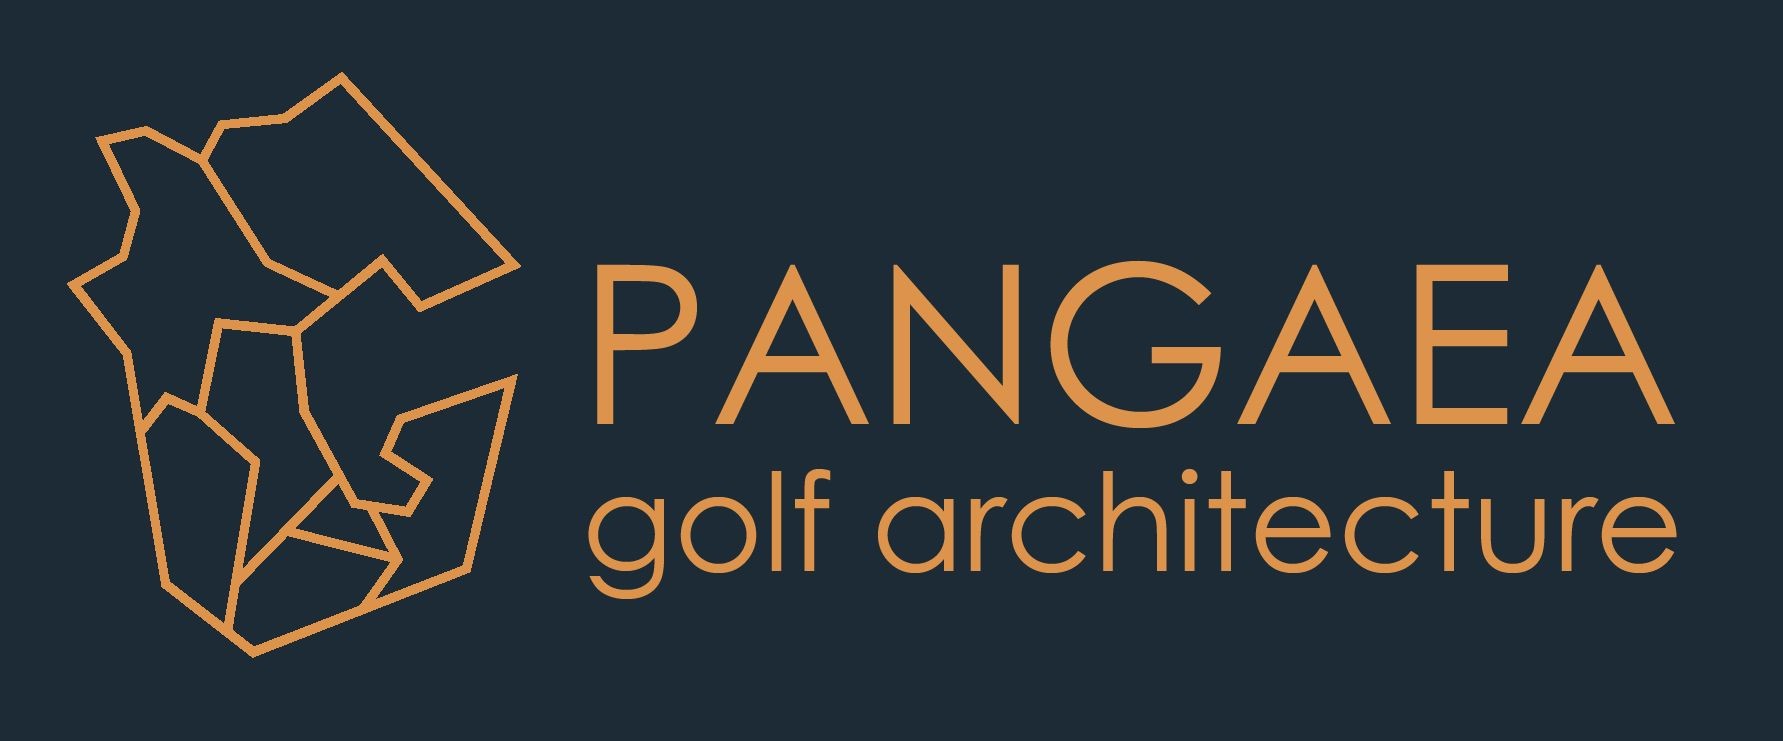 Jeffrey Danner and Stuart Rennie join talents to form Pangaea Golf Architecture